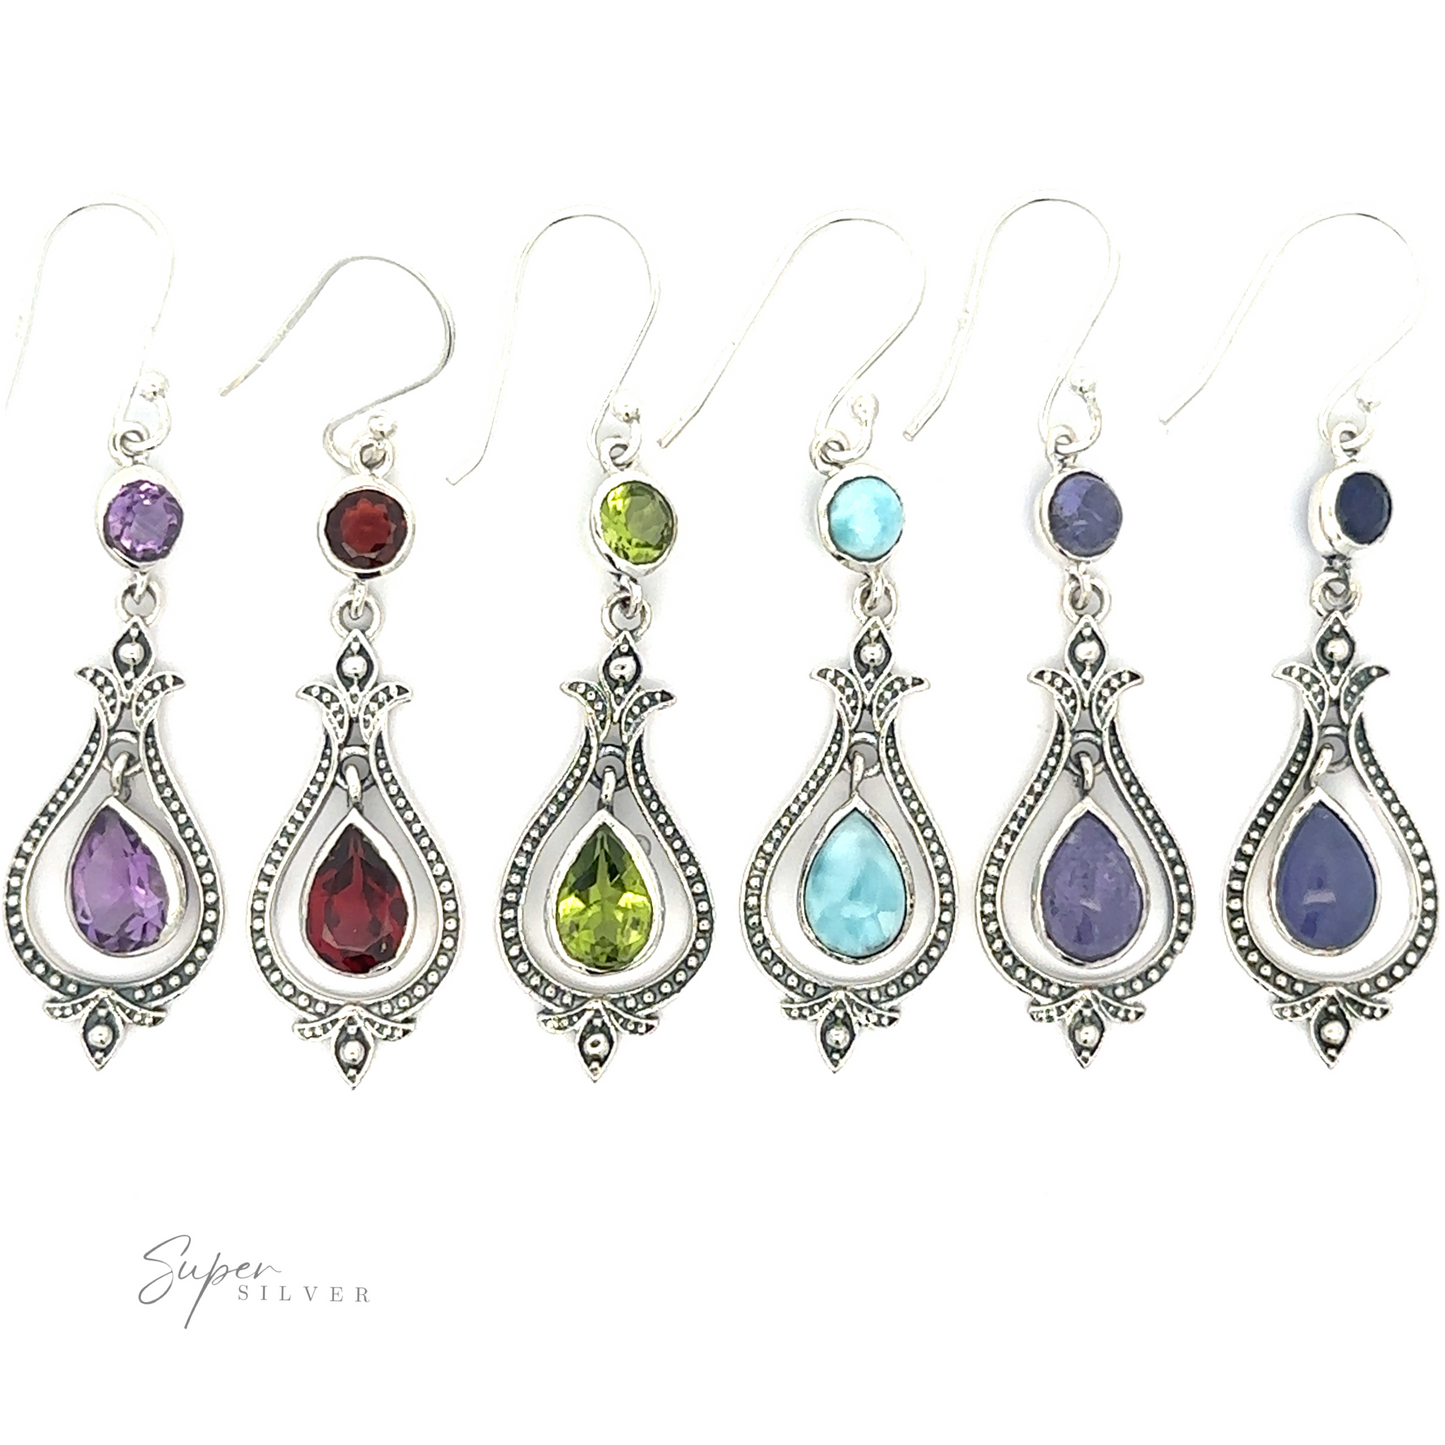 A set of six pairs of Vintage-Styled Teardrop Earrings with Gemstones, each showcasing a different colored gemstone—purple, red, green, light blue, dark blue, and white—in a .925 Sterling Silver dangle earrings design.